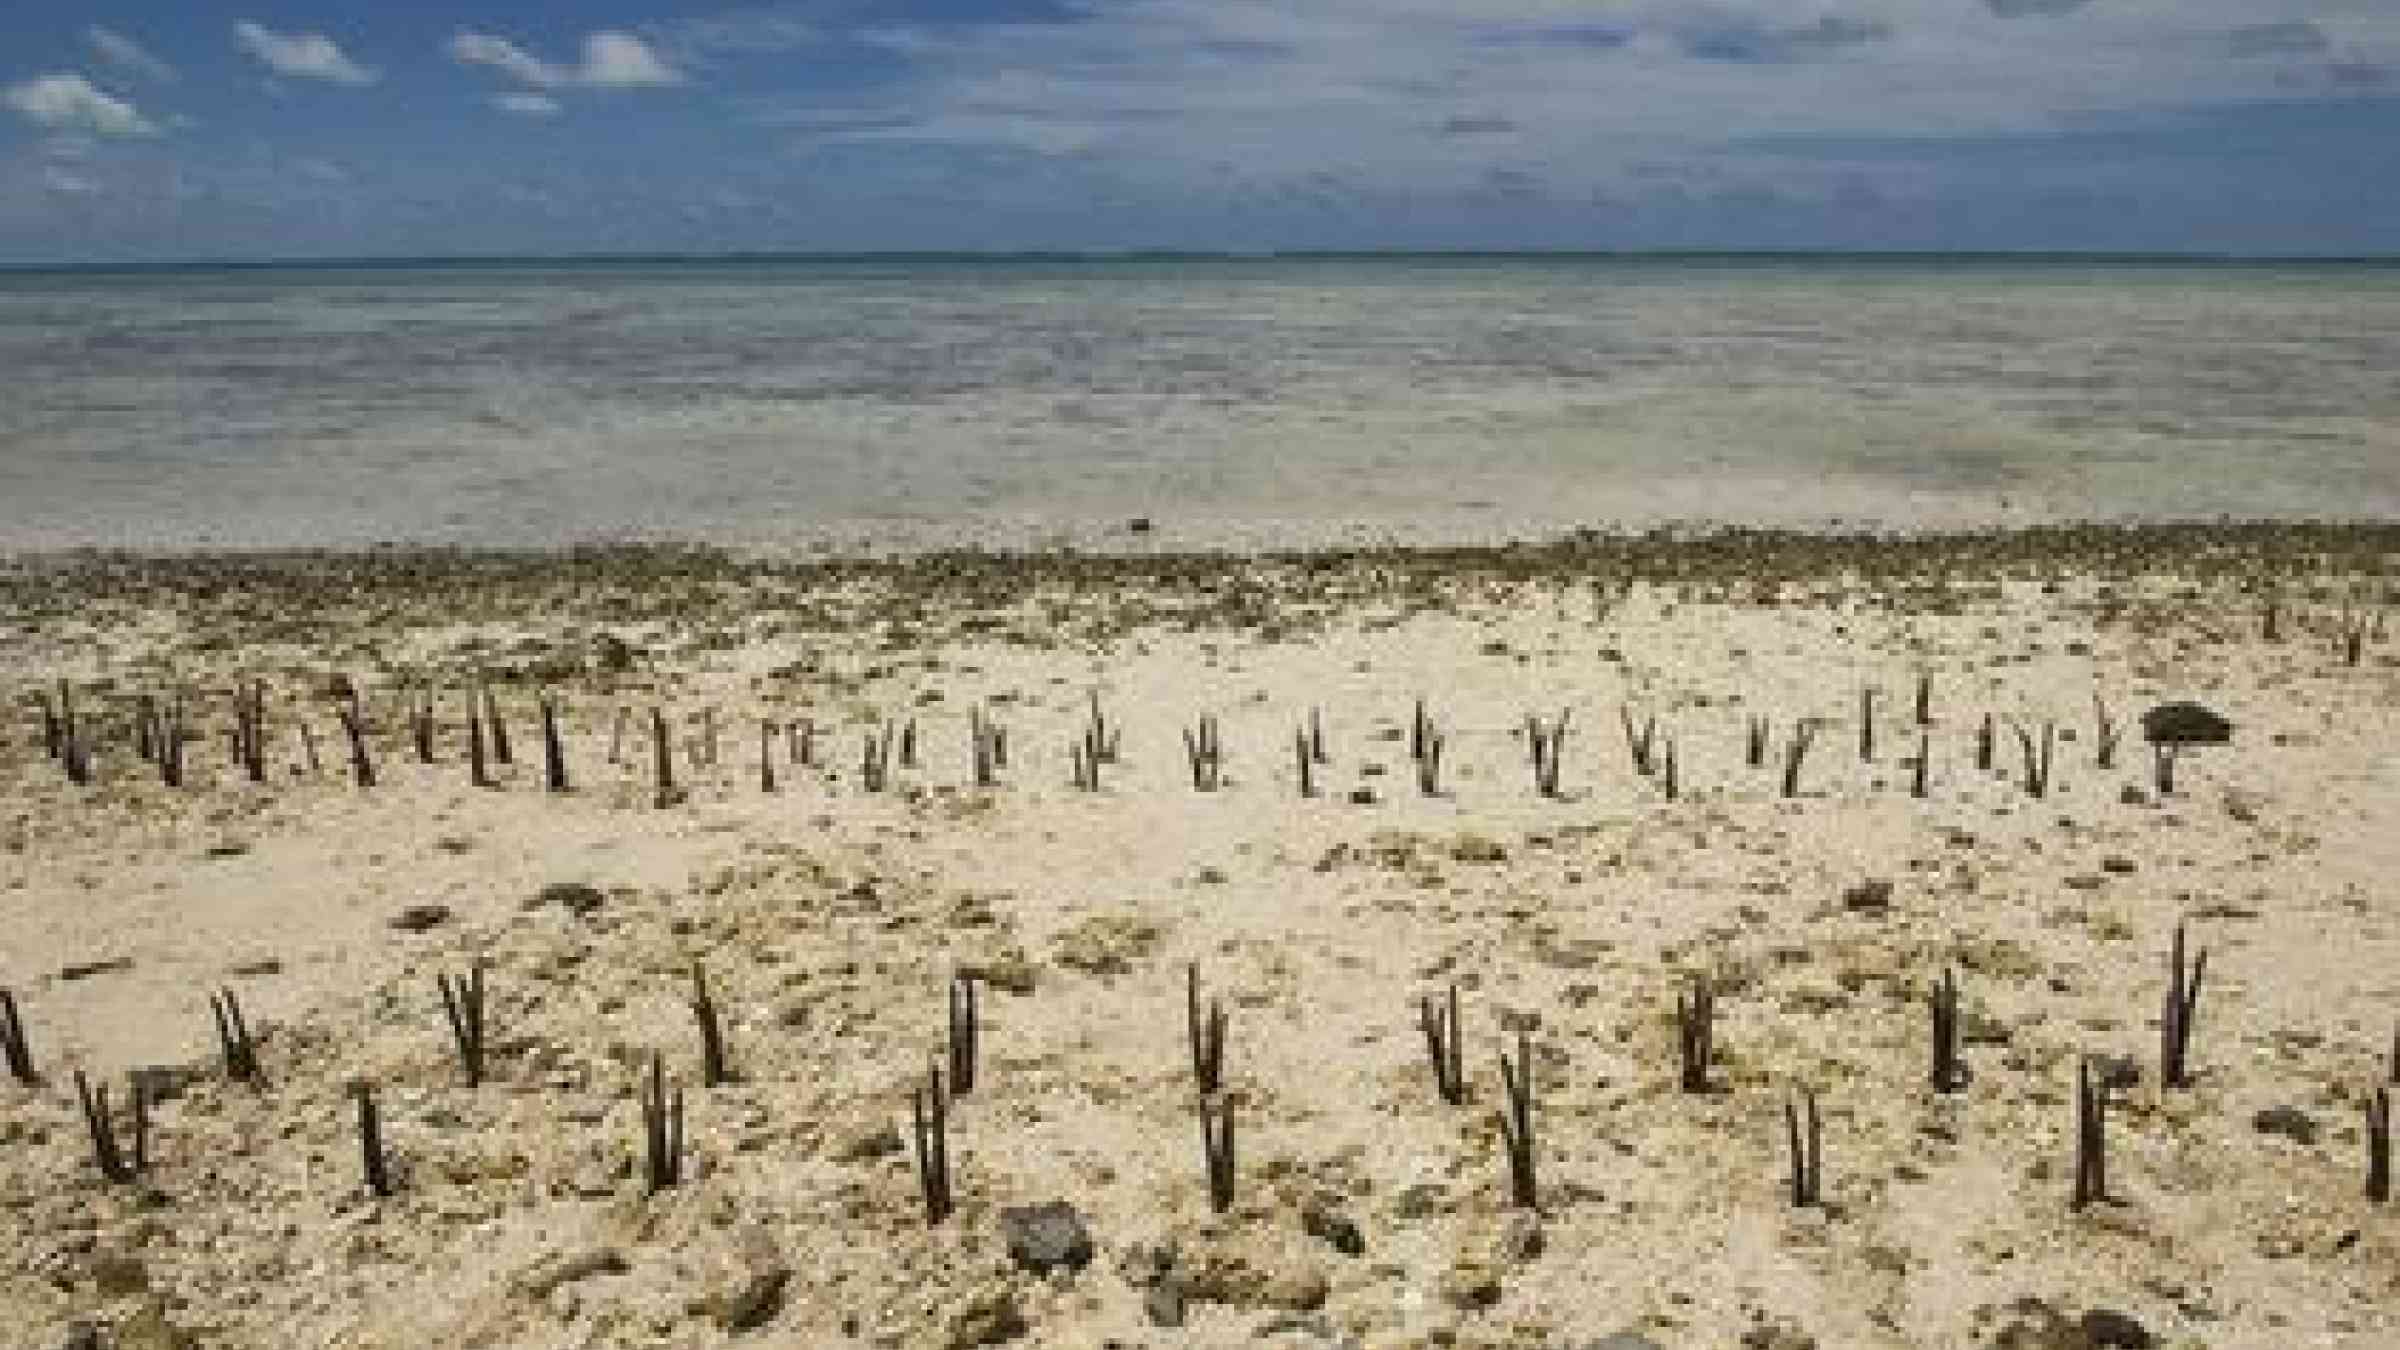 UN Secretary-General Ban Ki-moon helped plant these mangrove shoots on Tarawa, an atoll in the Pacific island nation of Kiribati following discussions with local people about the effects of climate change on this low-lying land.